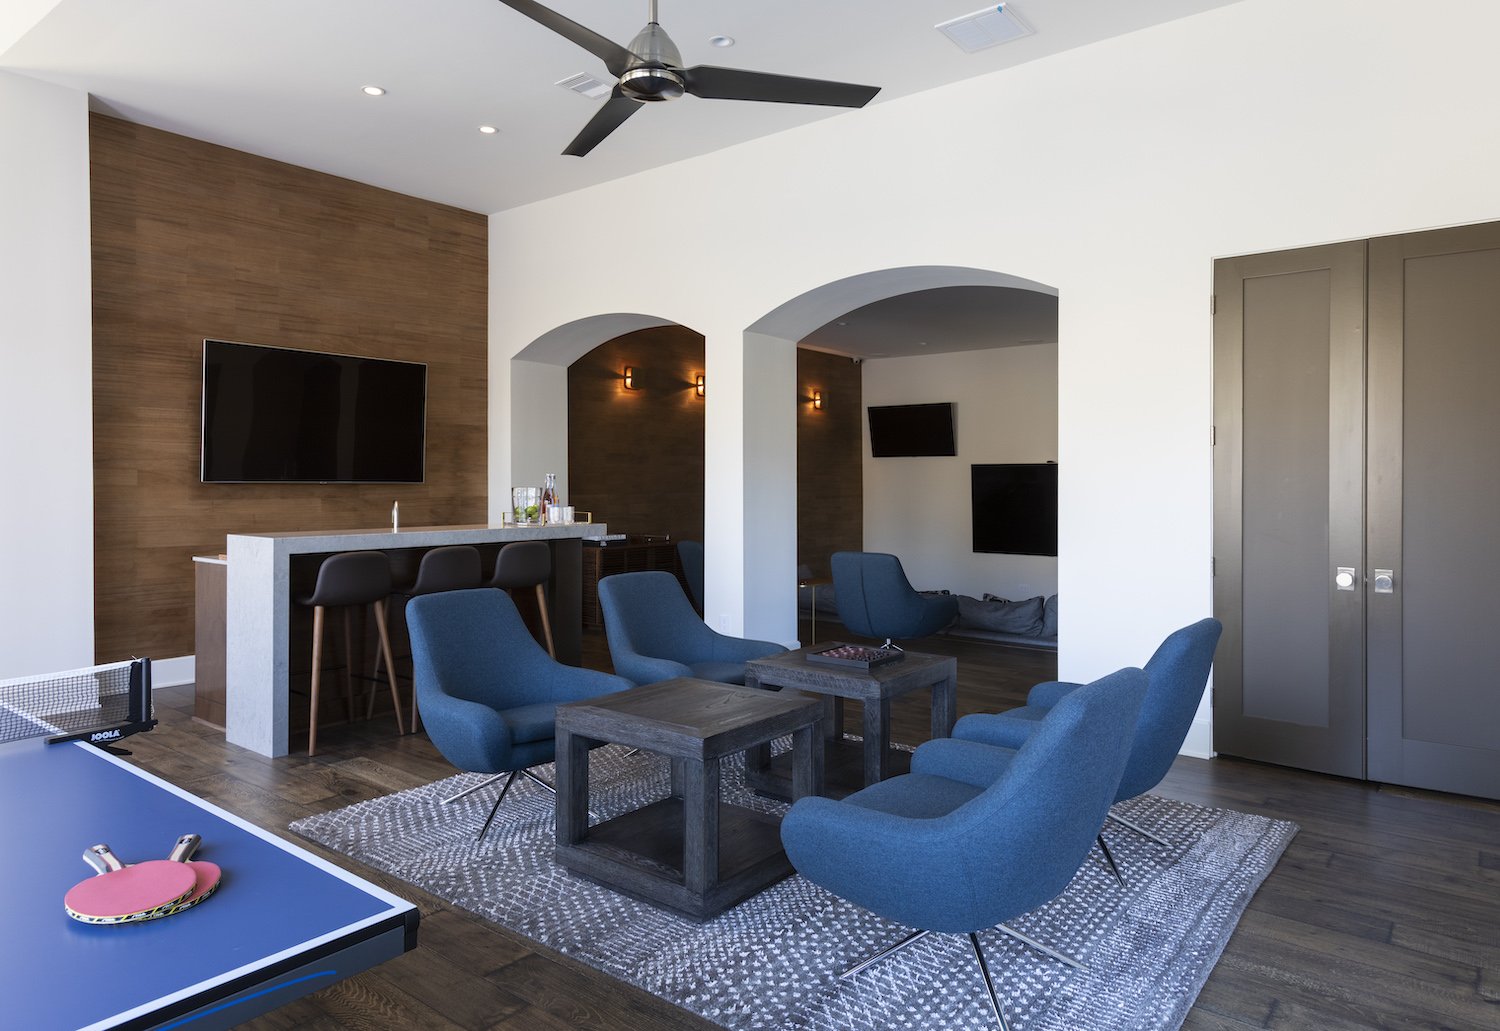 Kingwood Contemporary Game Room by Habitat Roche.jpg